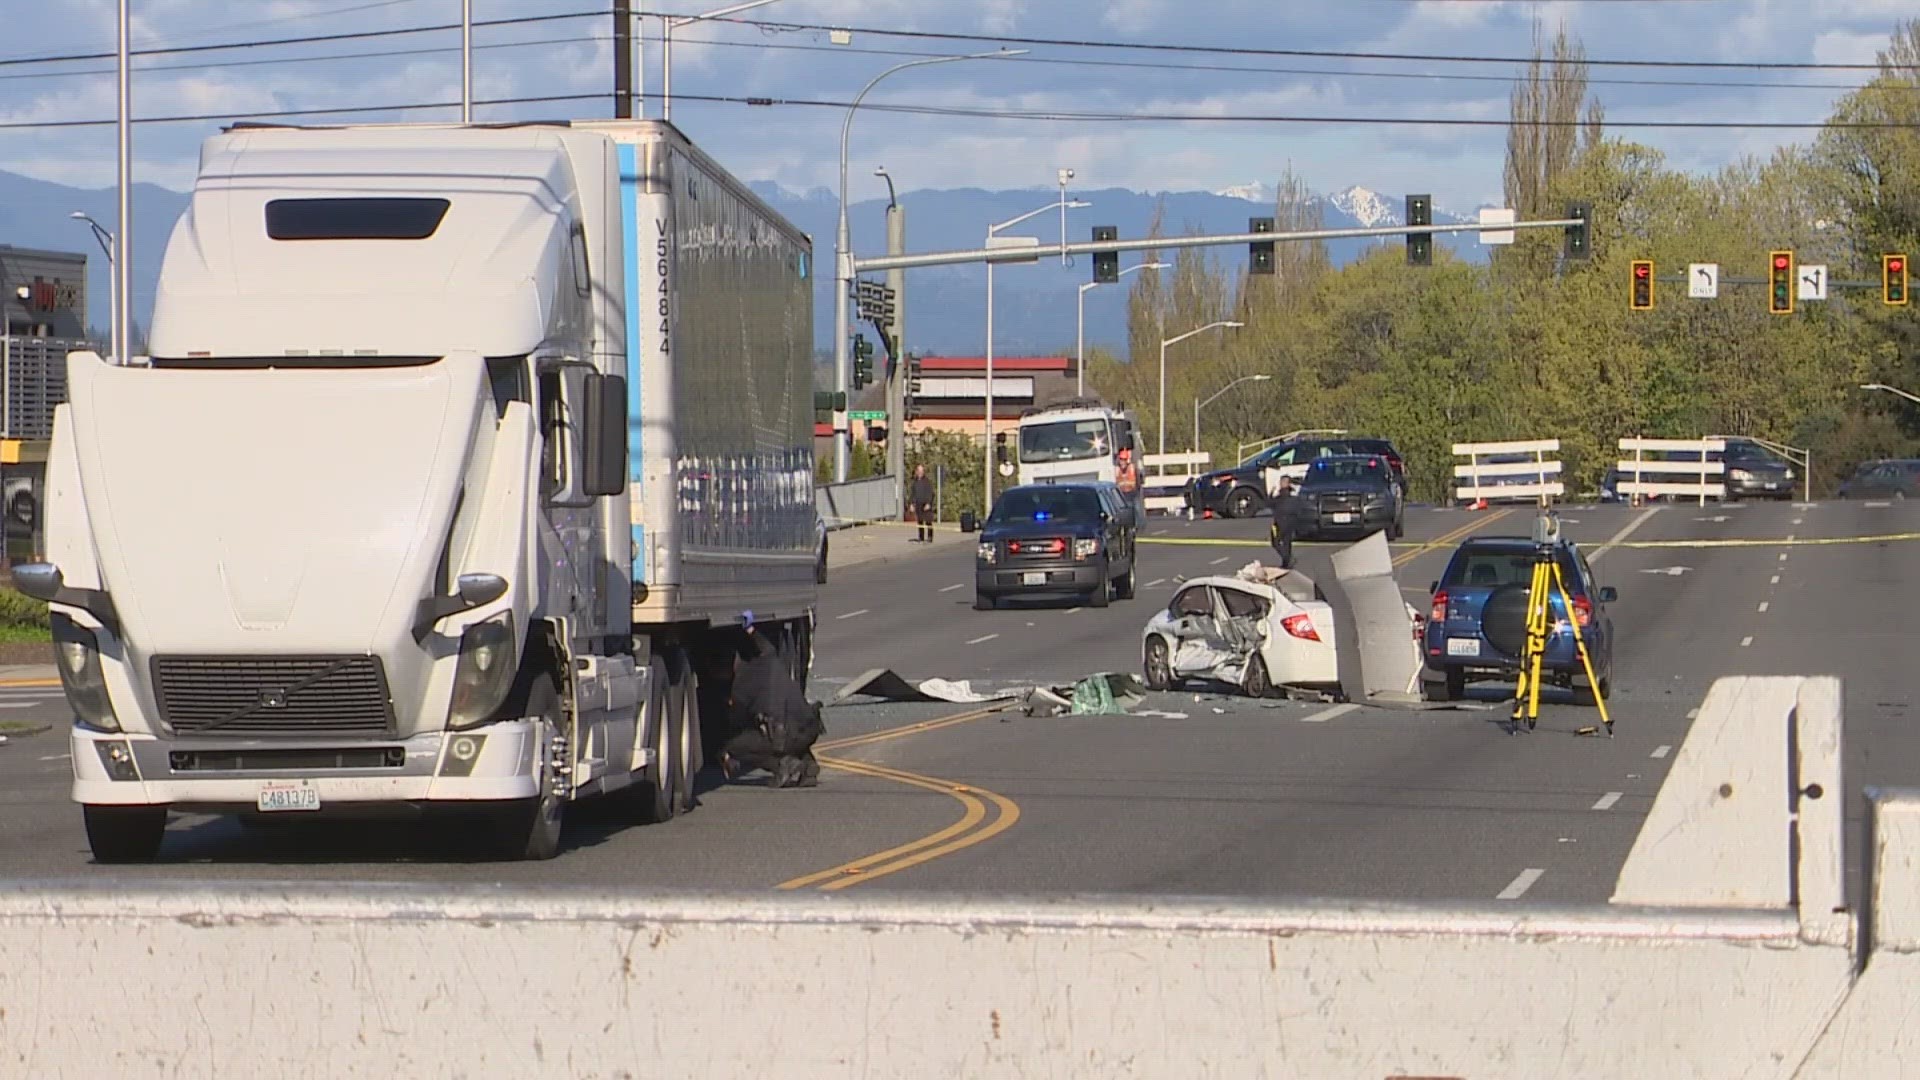 Four vehicles were involved in the crash and only one person was injured, officials say.